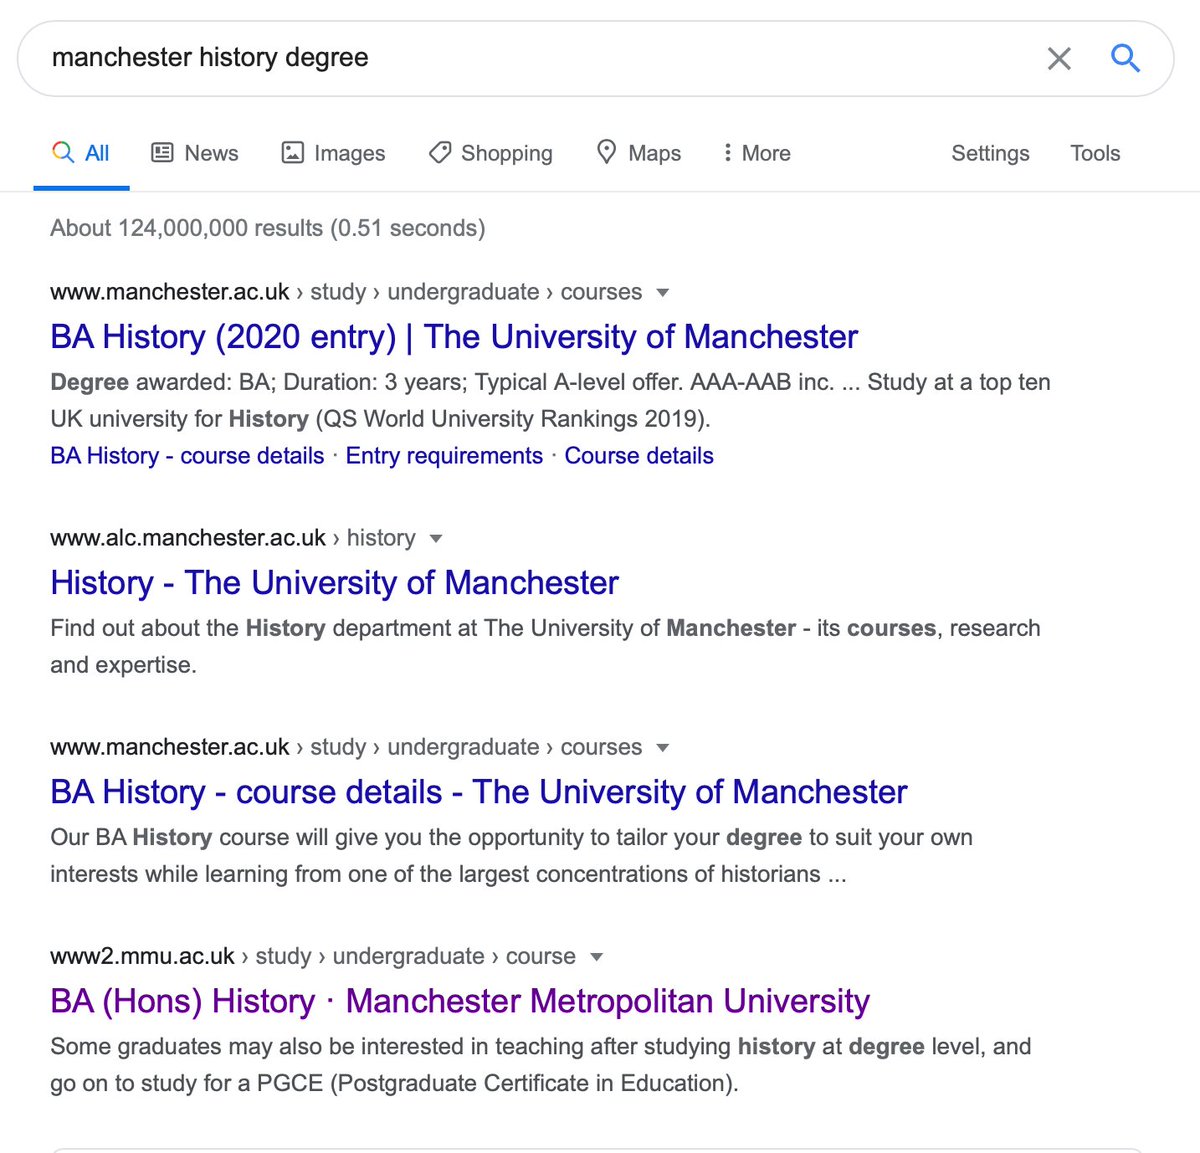 Maybe I'm being overly cynical, I thought. I searched instead for a "Manchester history degree" at my local RG institution and no such ad came up. Clearly targeted.